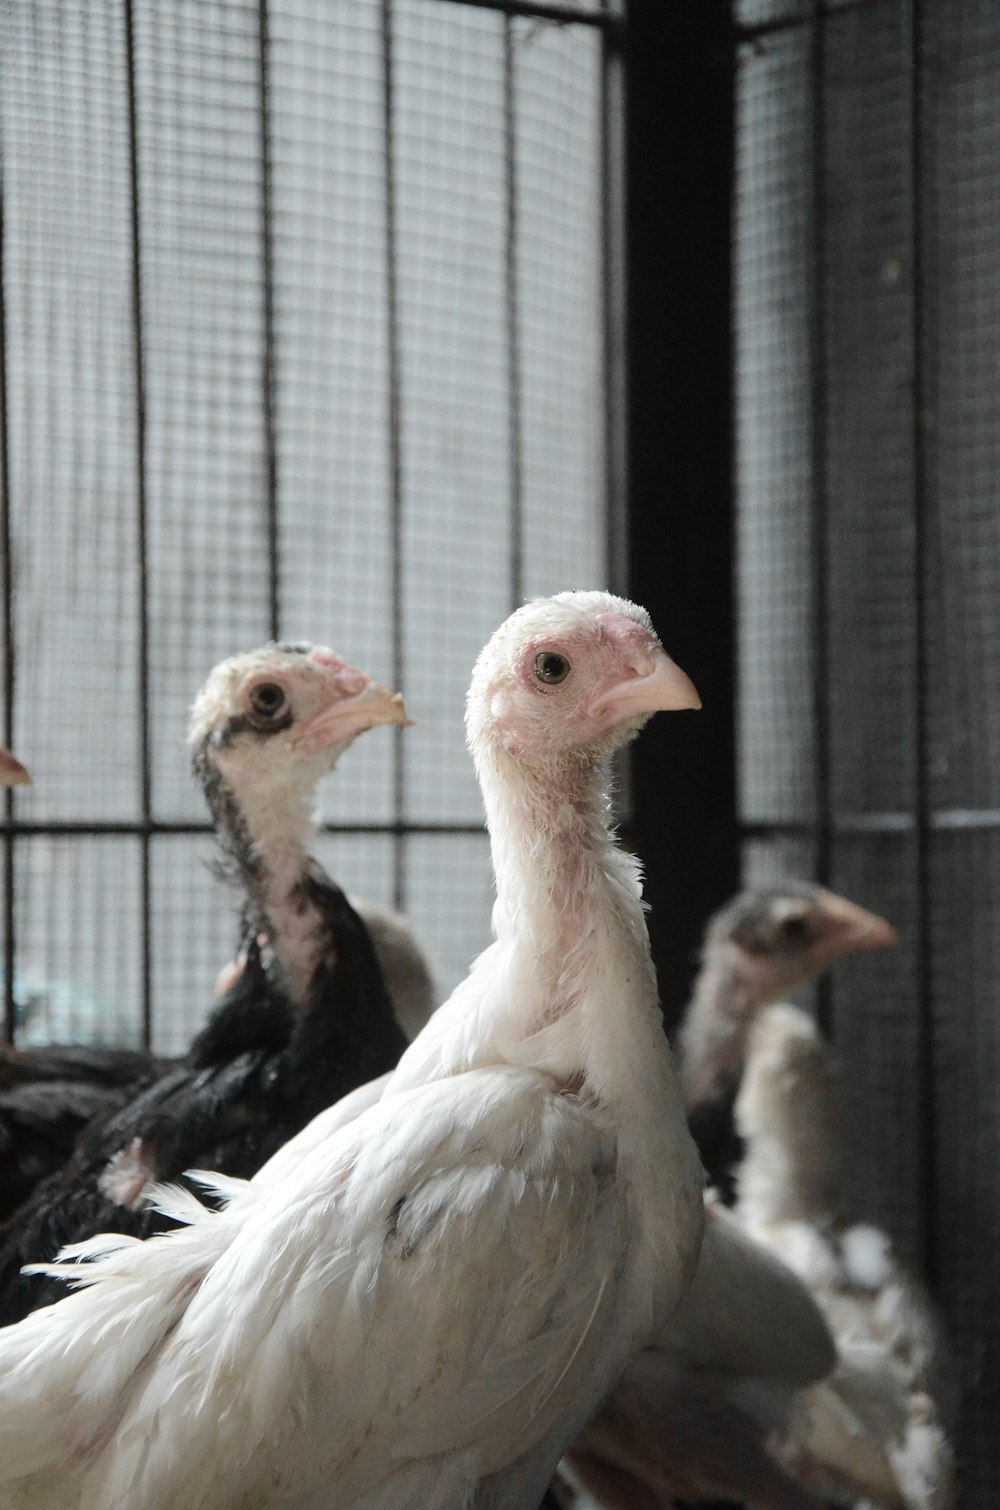 several white and black chickens inside a cage